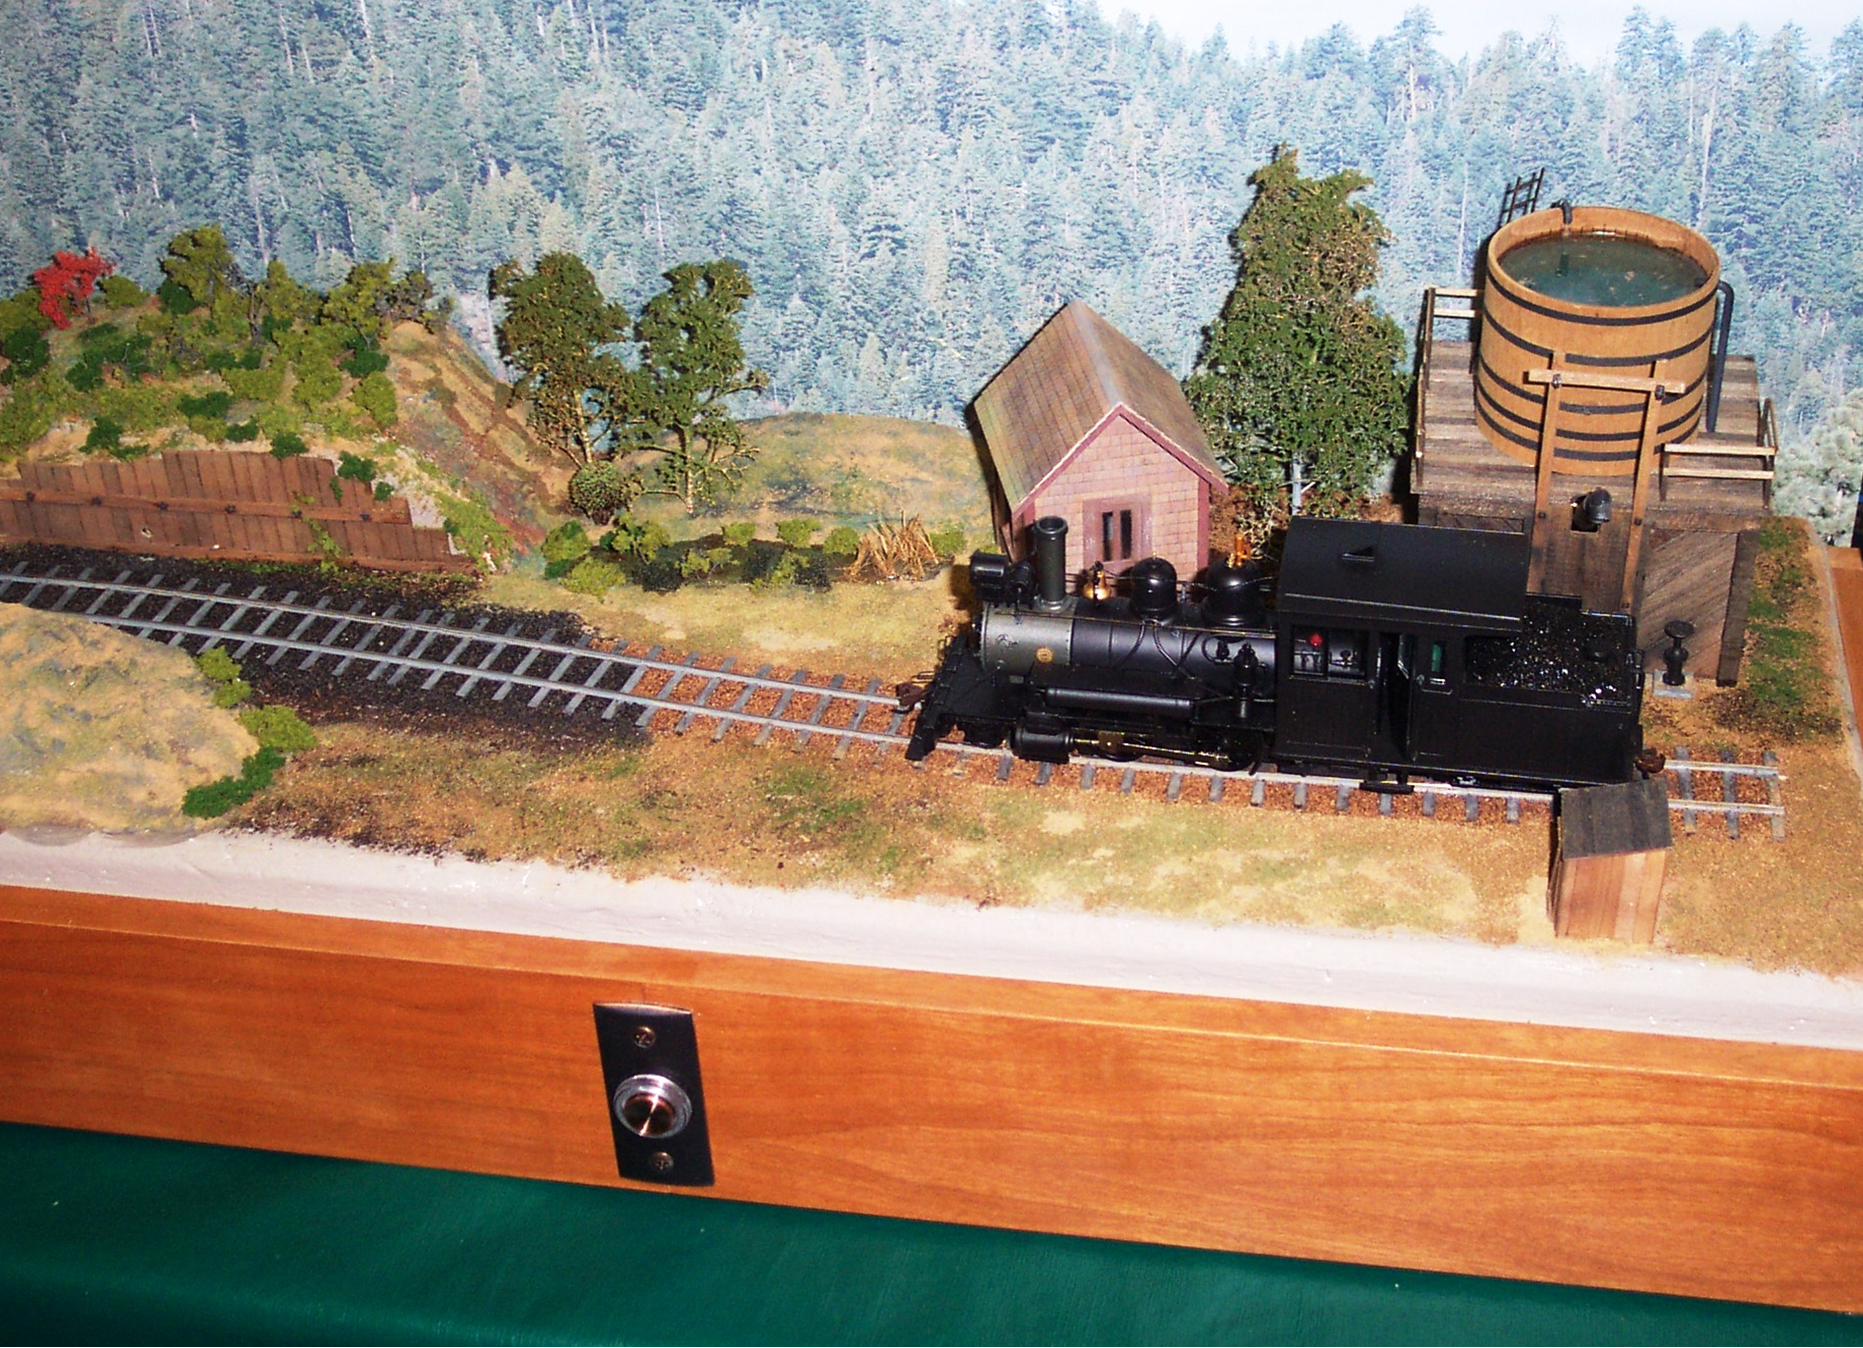 Joe Norris presented our program. Here is a view of his diorama with the steam engine taking on water.